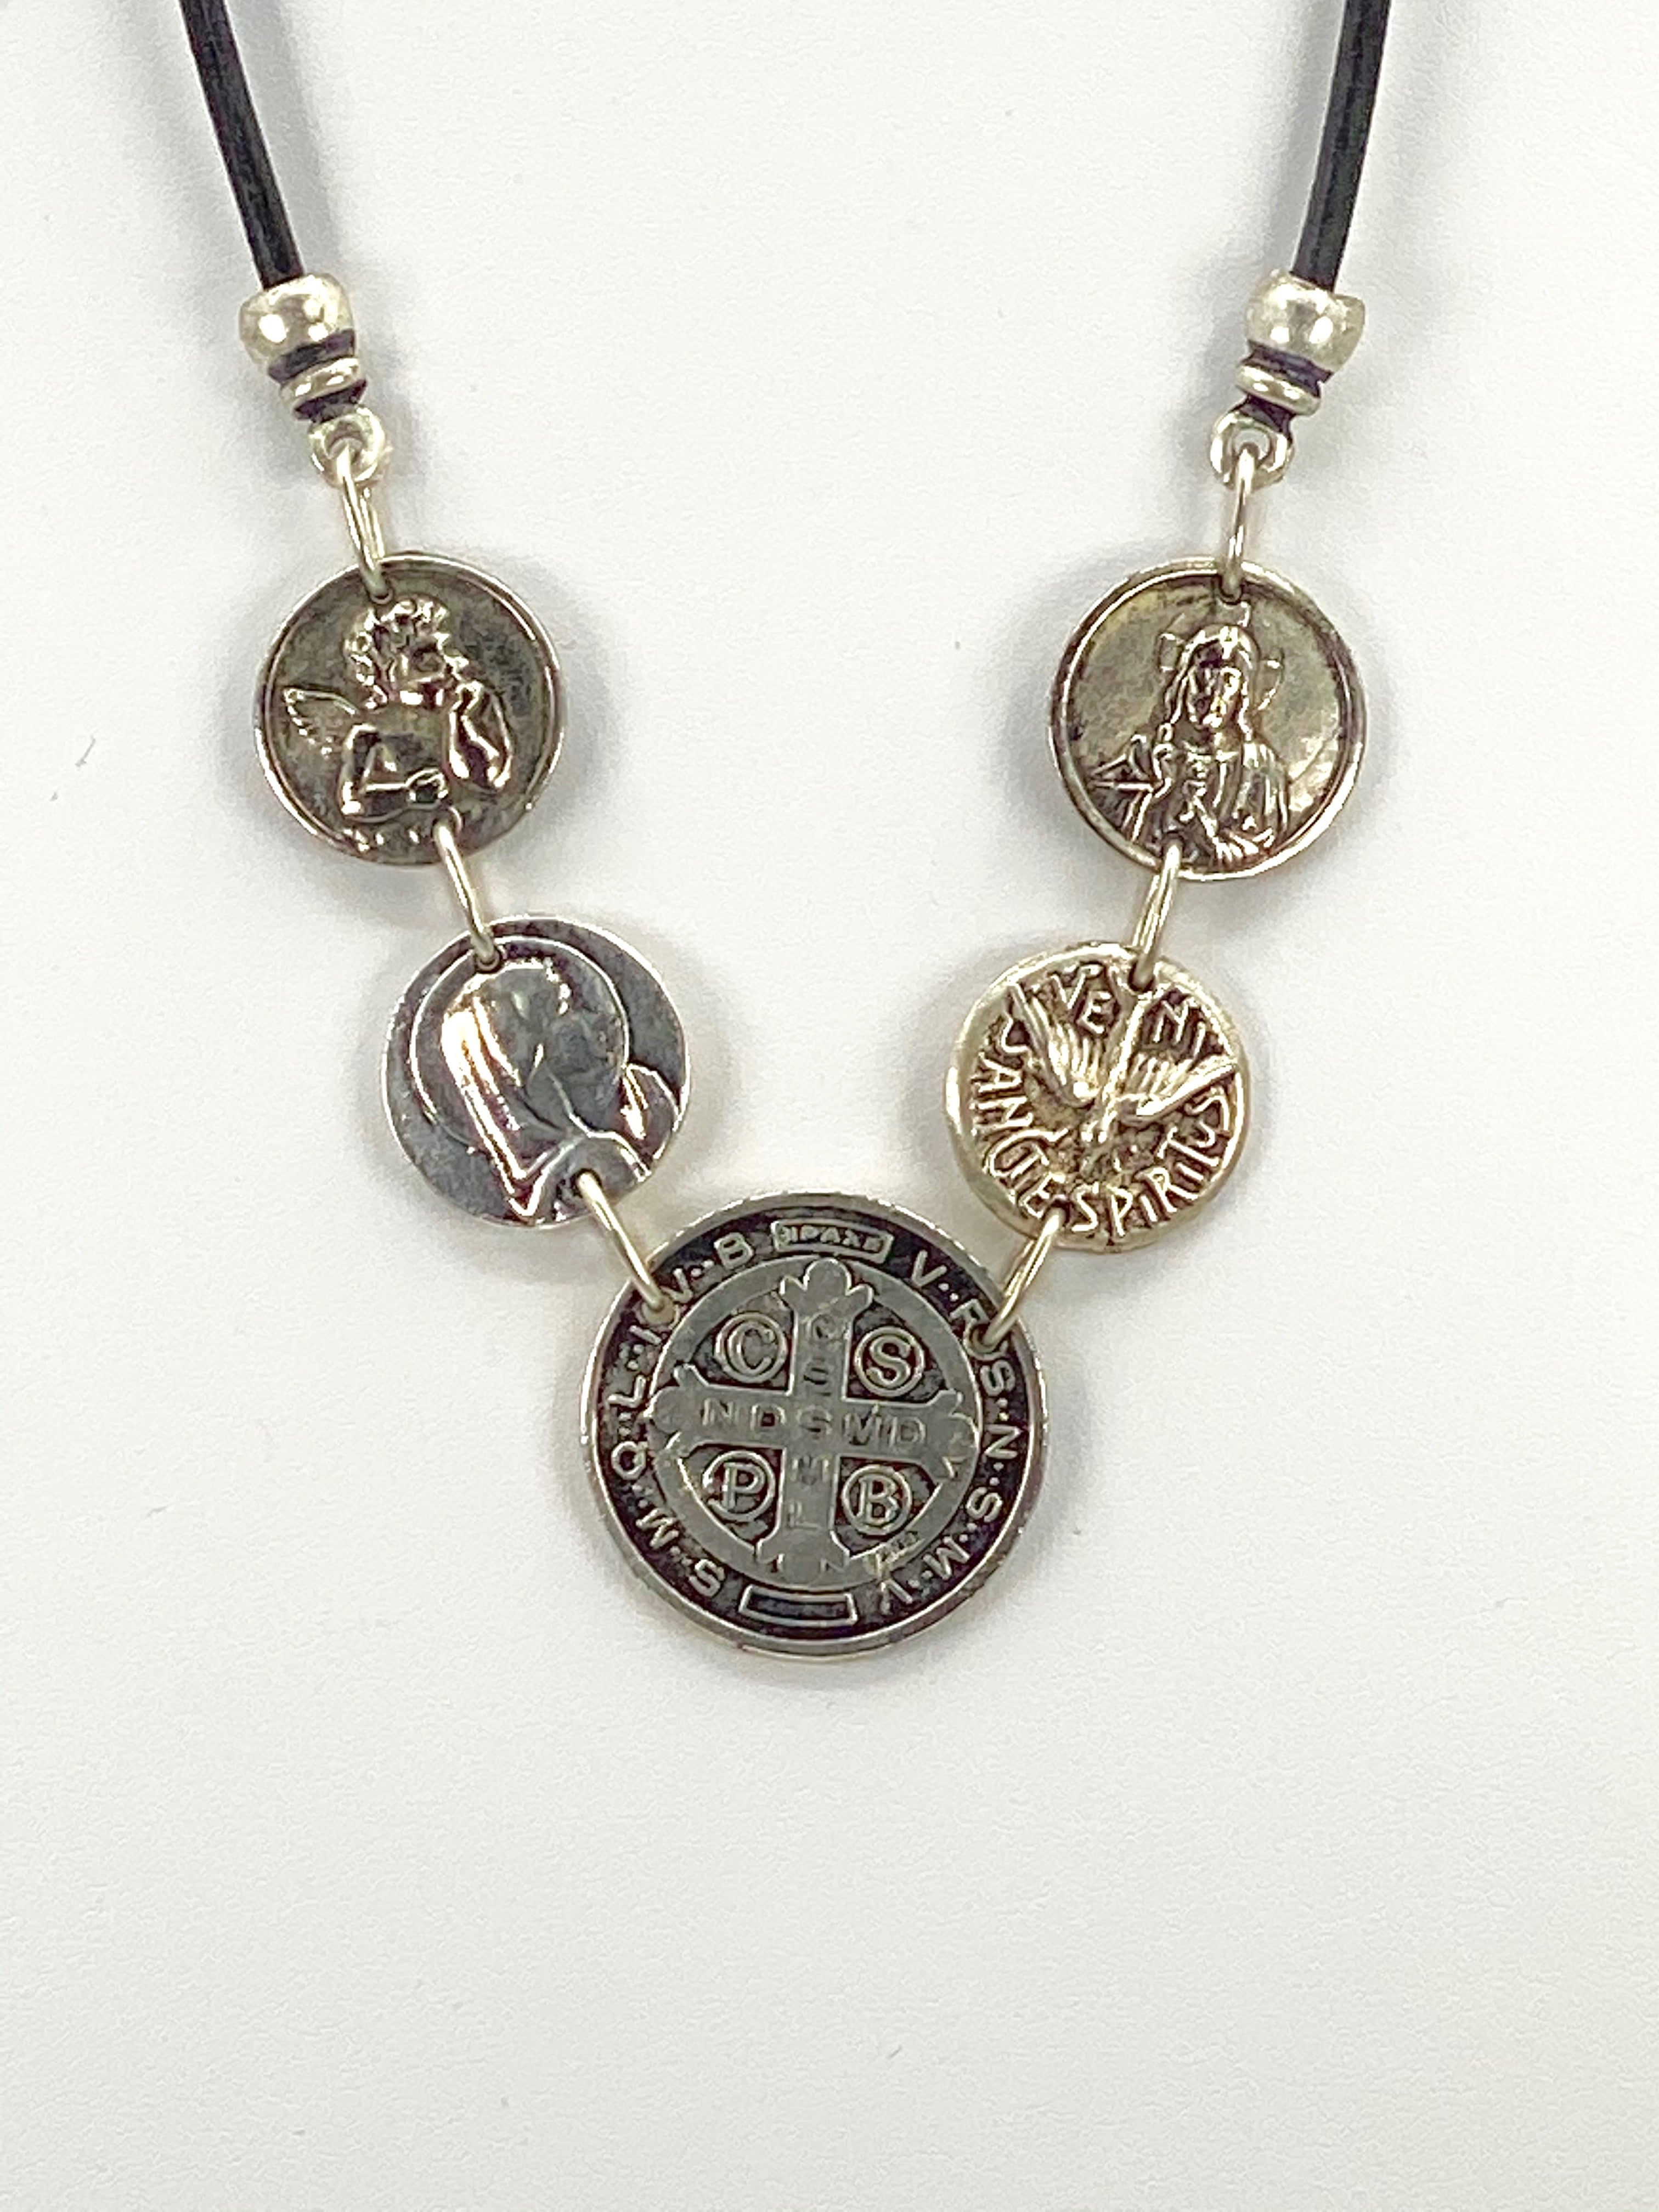 Vintage Necklace of St. Benedict, Virgin Mary, Sacred Heart of Jesus, Holy Spirit and Guardian Angel - Handmade Jewelry with Genuine Leather Strap by Graciela's Collection